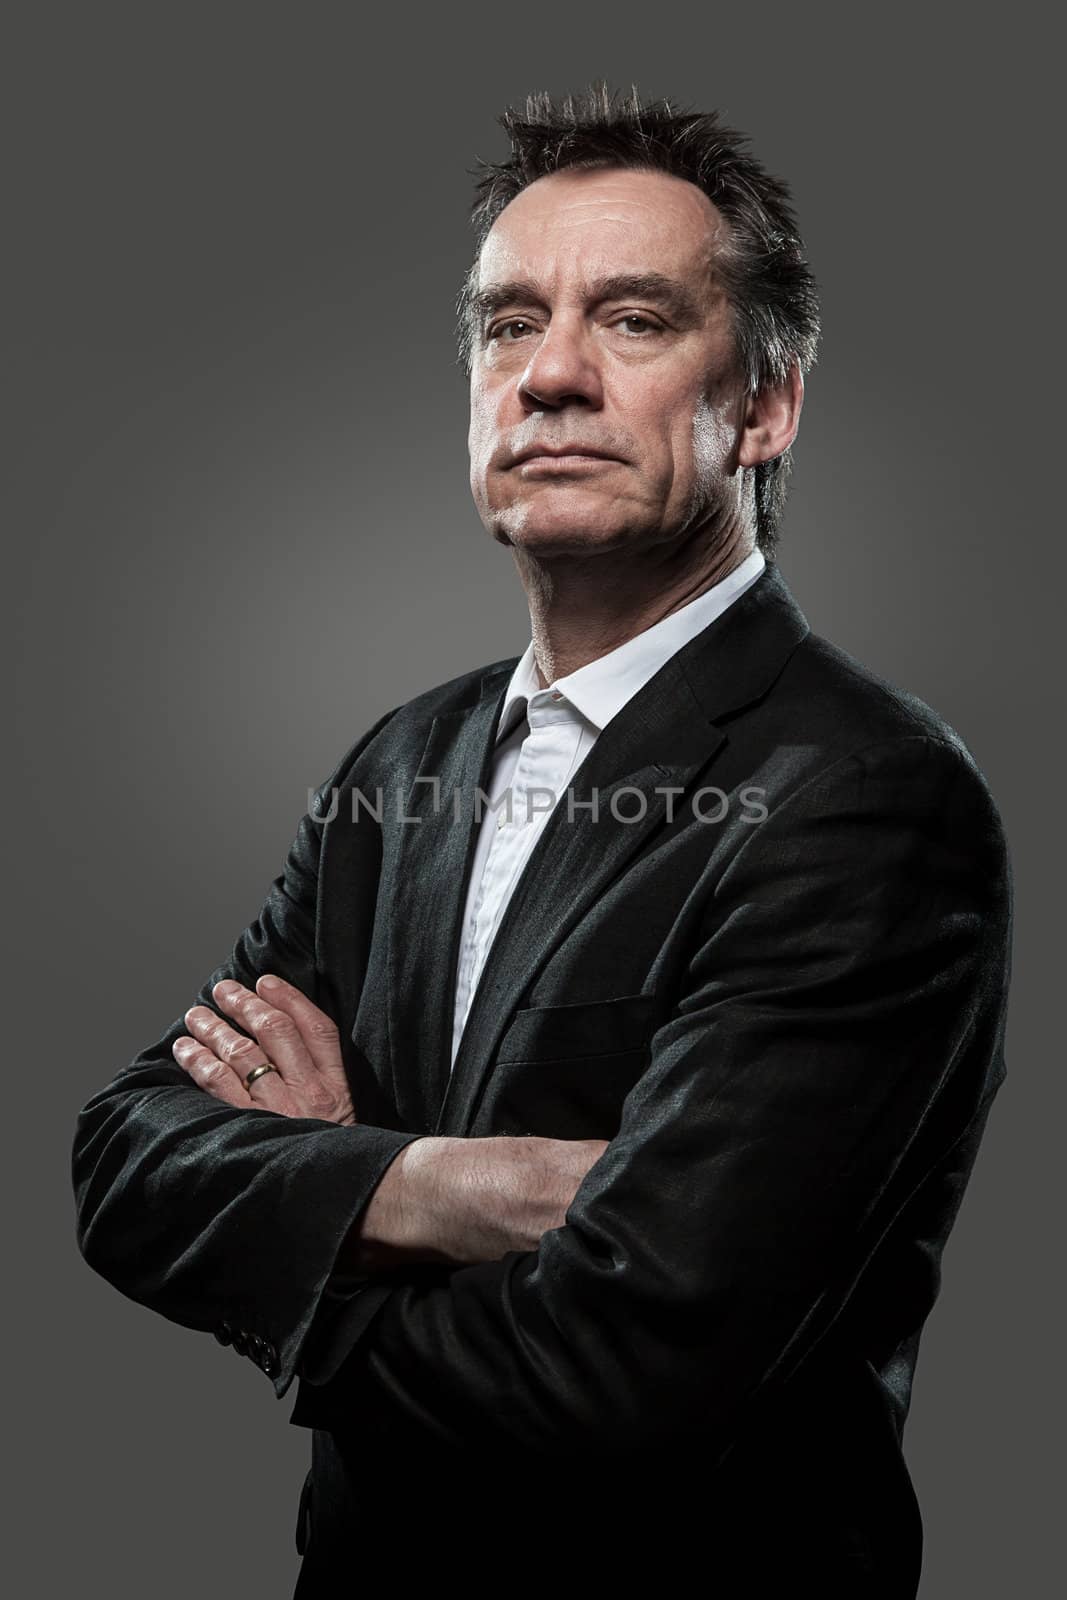 Stern Imposing Middle age Business Man with Arms Folded in Suit on Grey Background Grunge Look